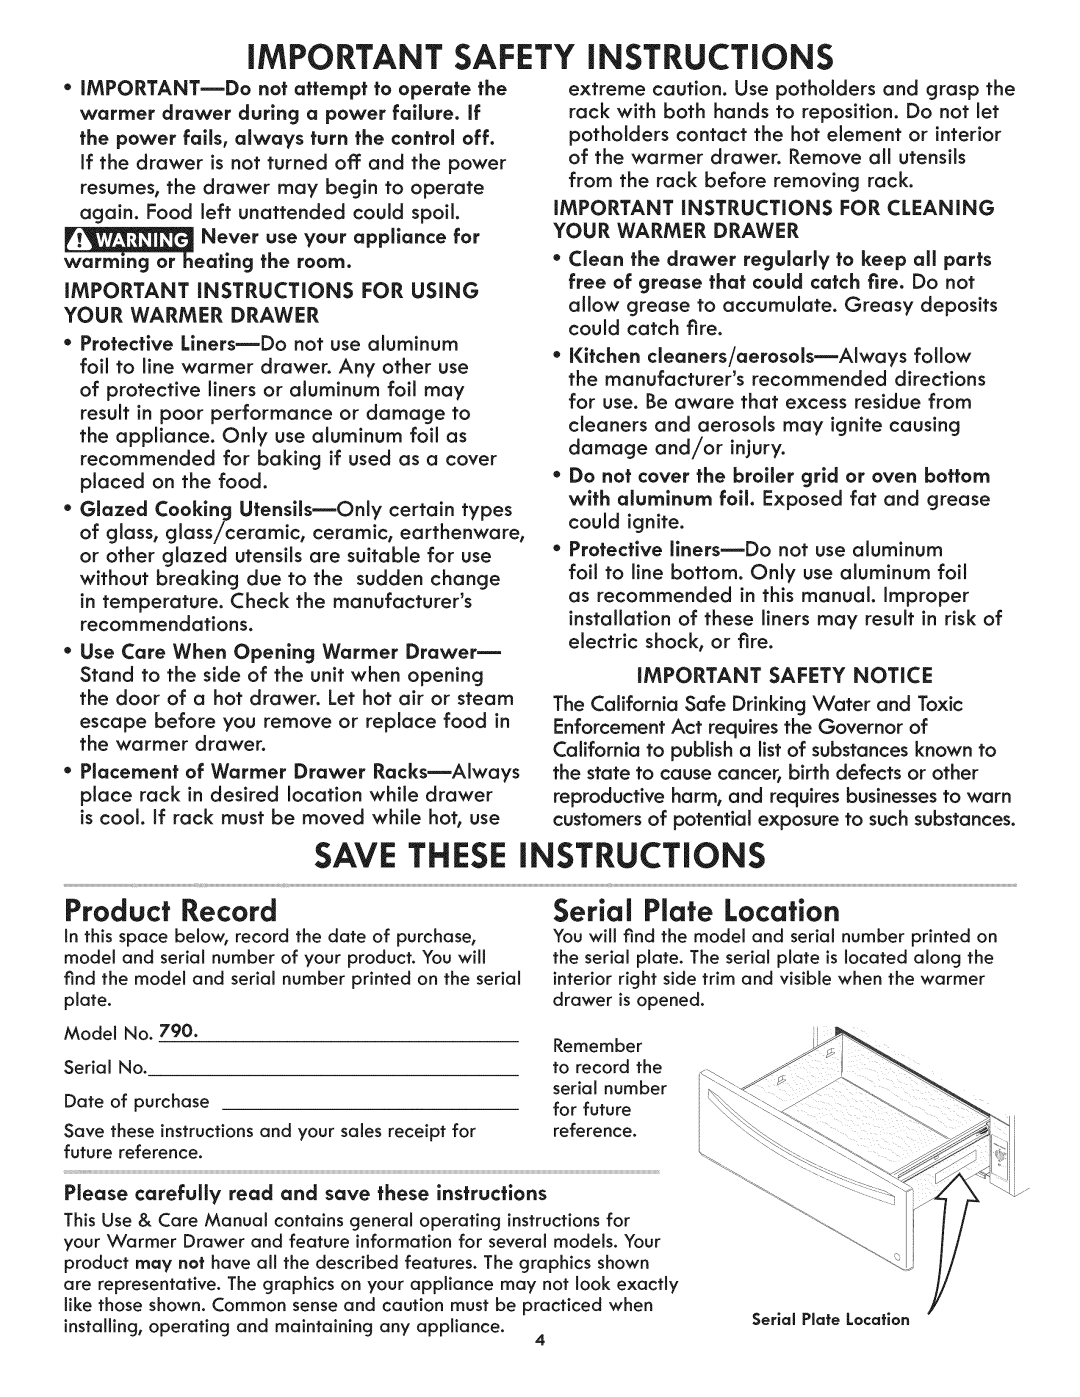 Kenmore 790.4928, 4931 manual SAVE THESE iNSTRUCTiONS, Product Record, iMPORTANT SAFETY iNSTRUCTiONS, Serial Plate Location 